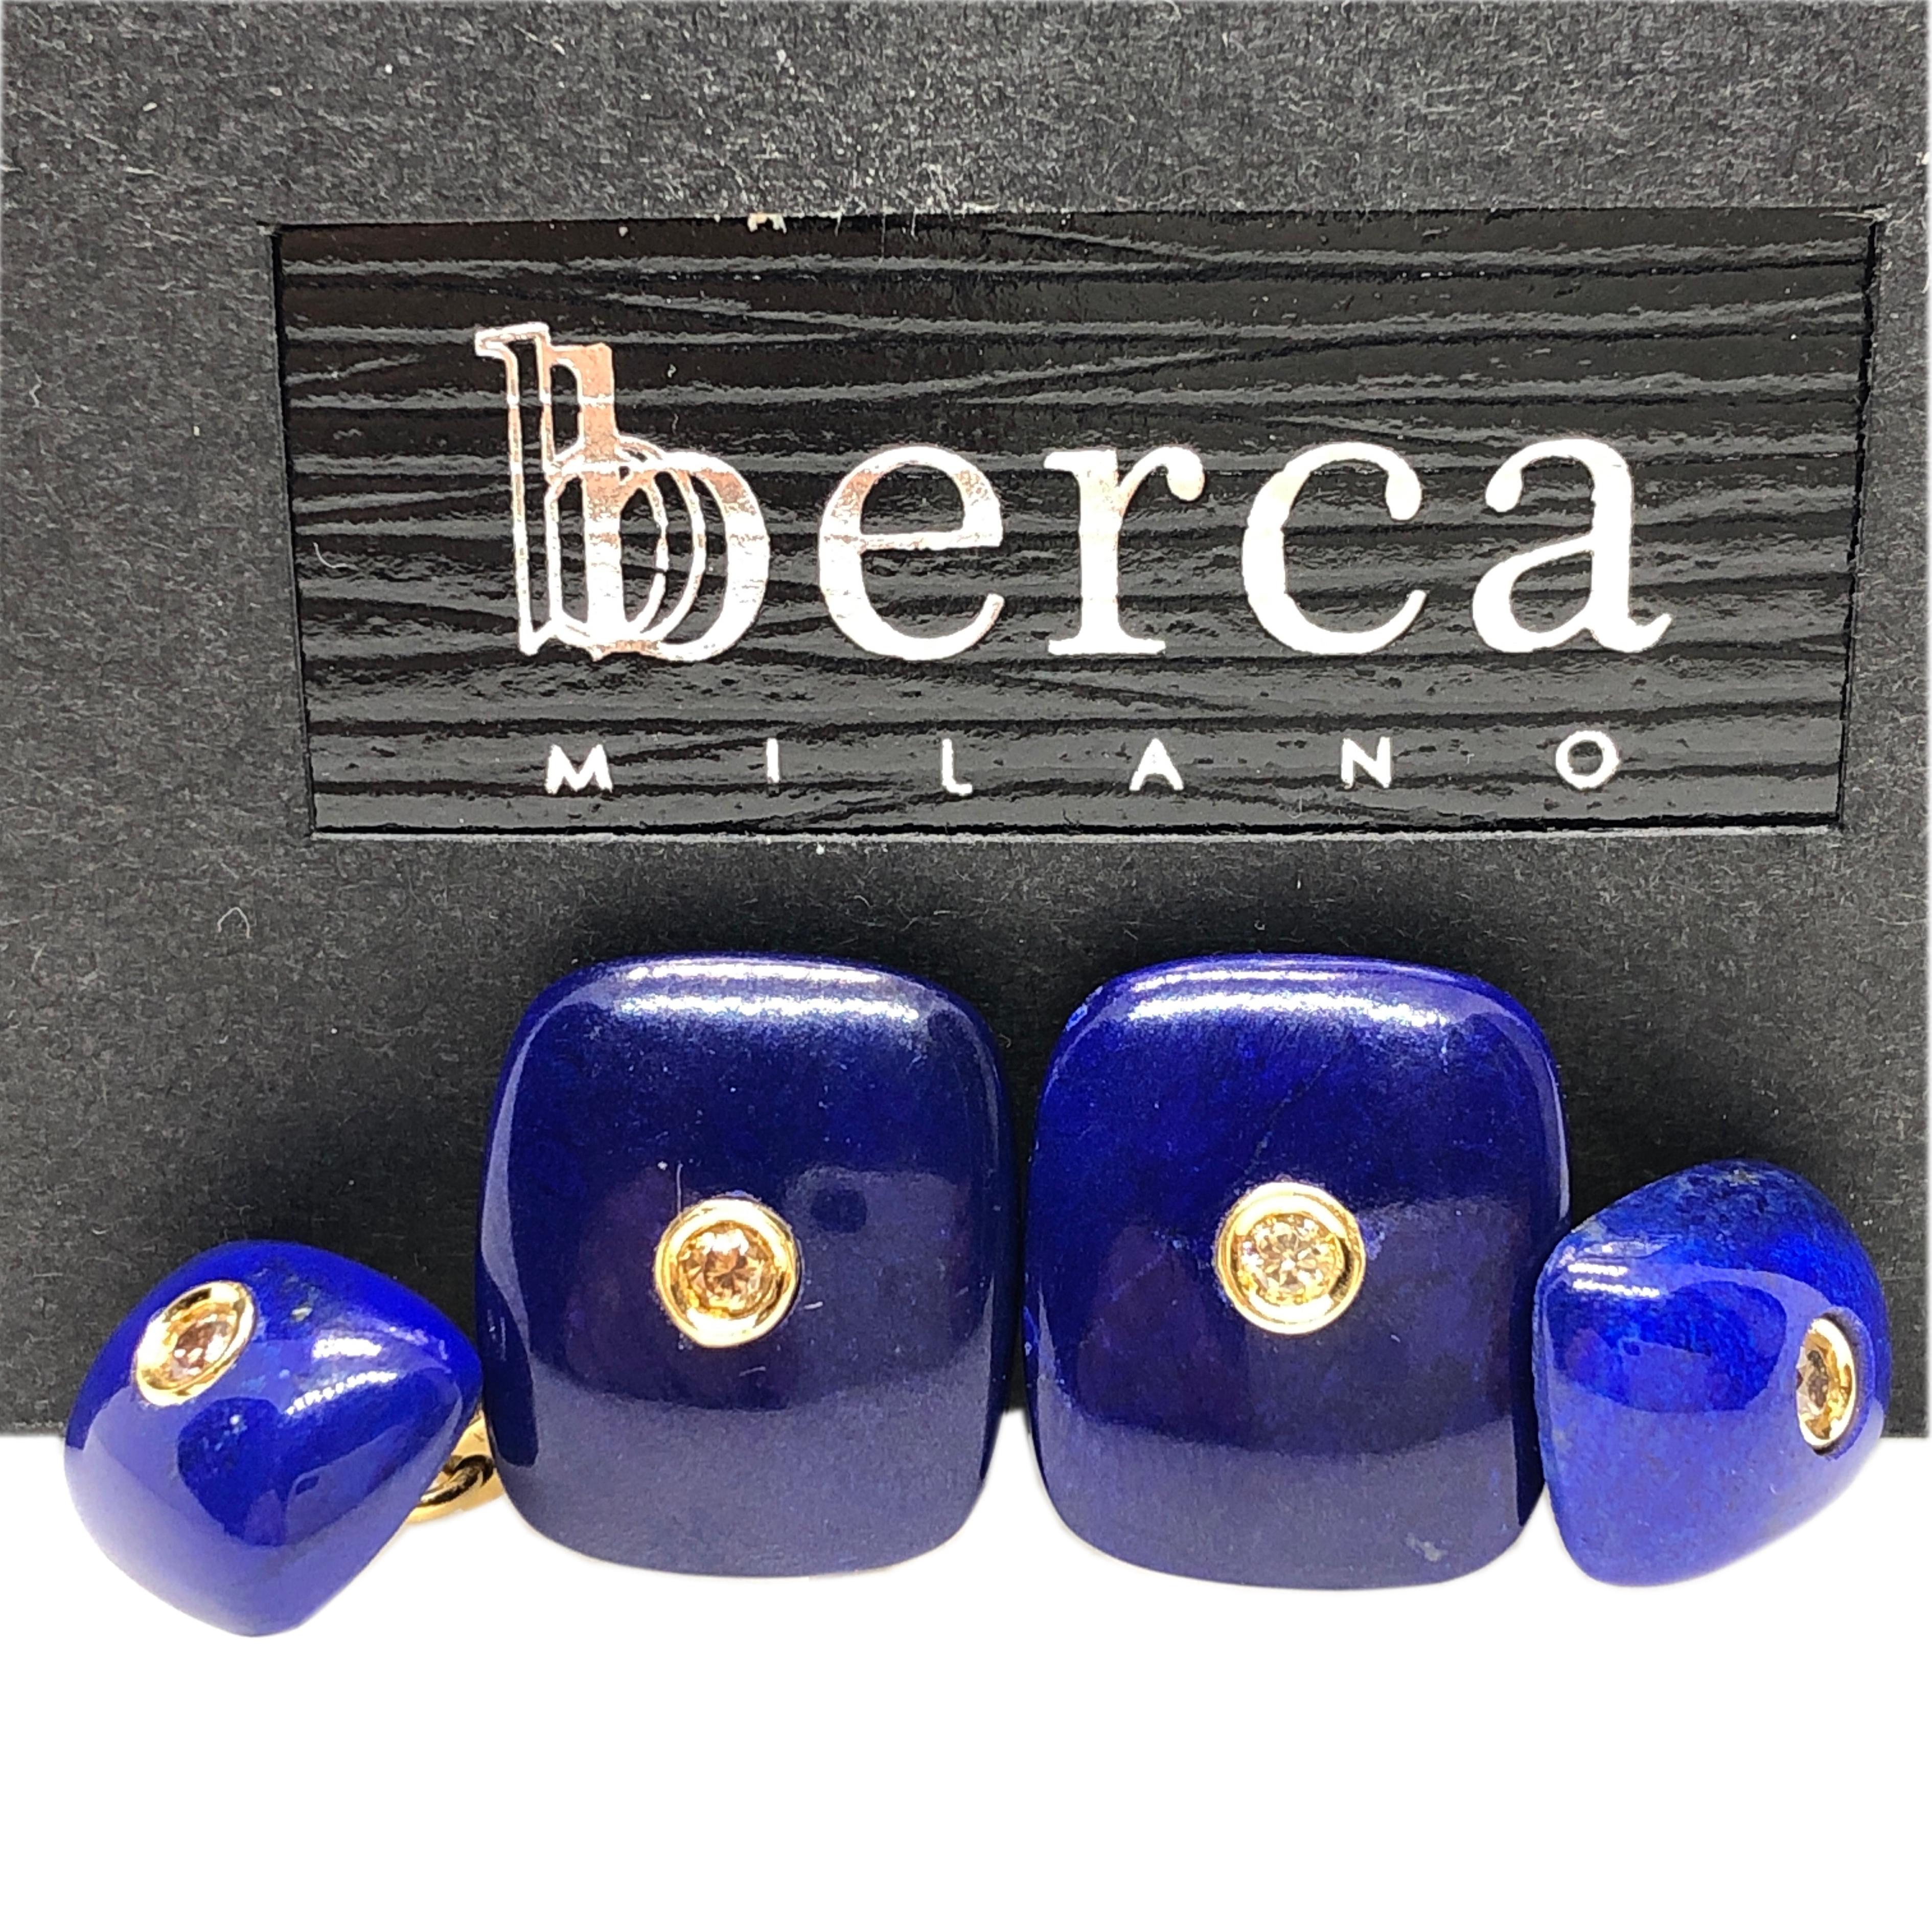 Absolutely Chic, Classy yet Timeless Rectangular Shaped Hand Inlaid Natural Afghan Deep Blue Lapis Lazuli Cufflinks featuring four natural 0.39 Carat Brilliant Cut Yellow Sapphire in a 18k Yellow Gold setting.

In our smart fitted black Box and